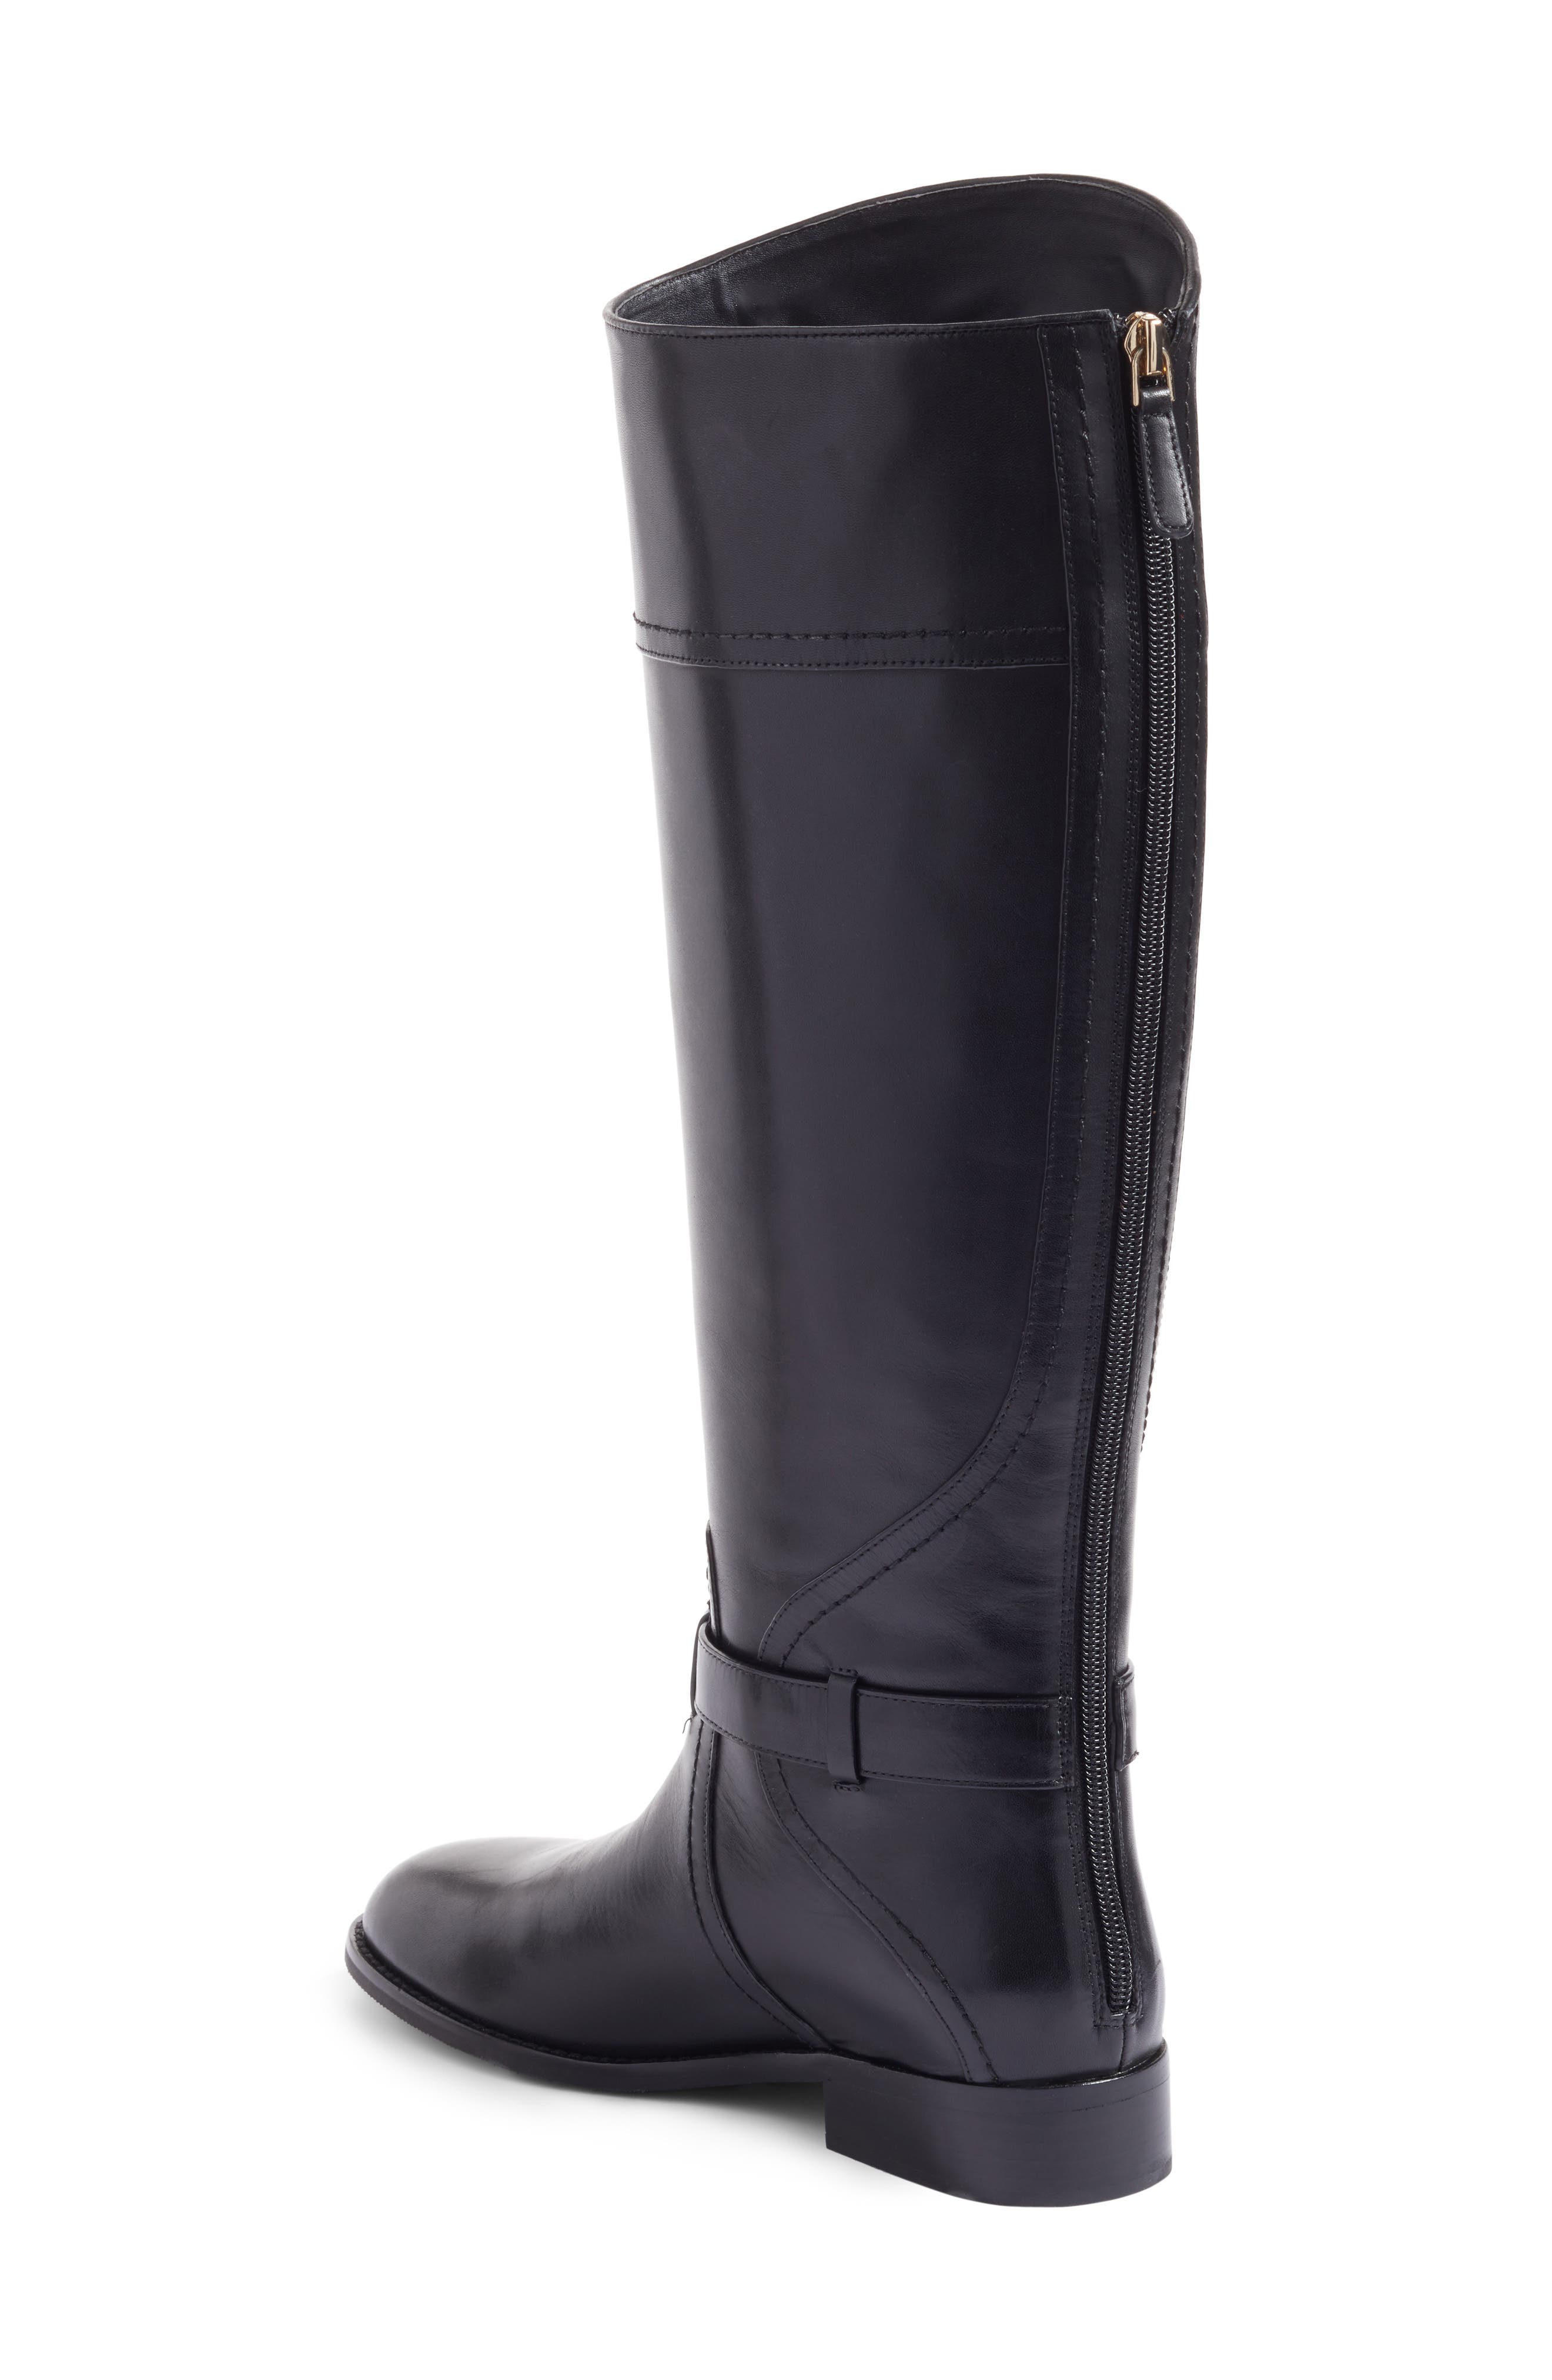 tory burch adeline riding boots